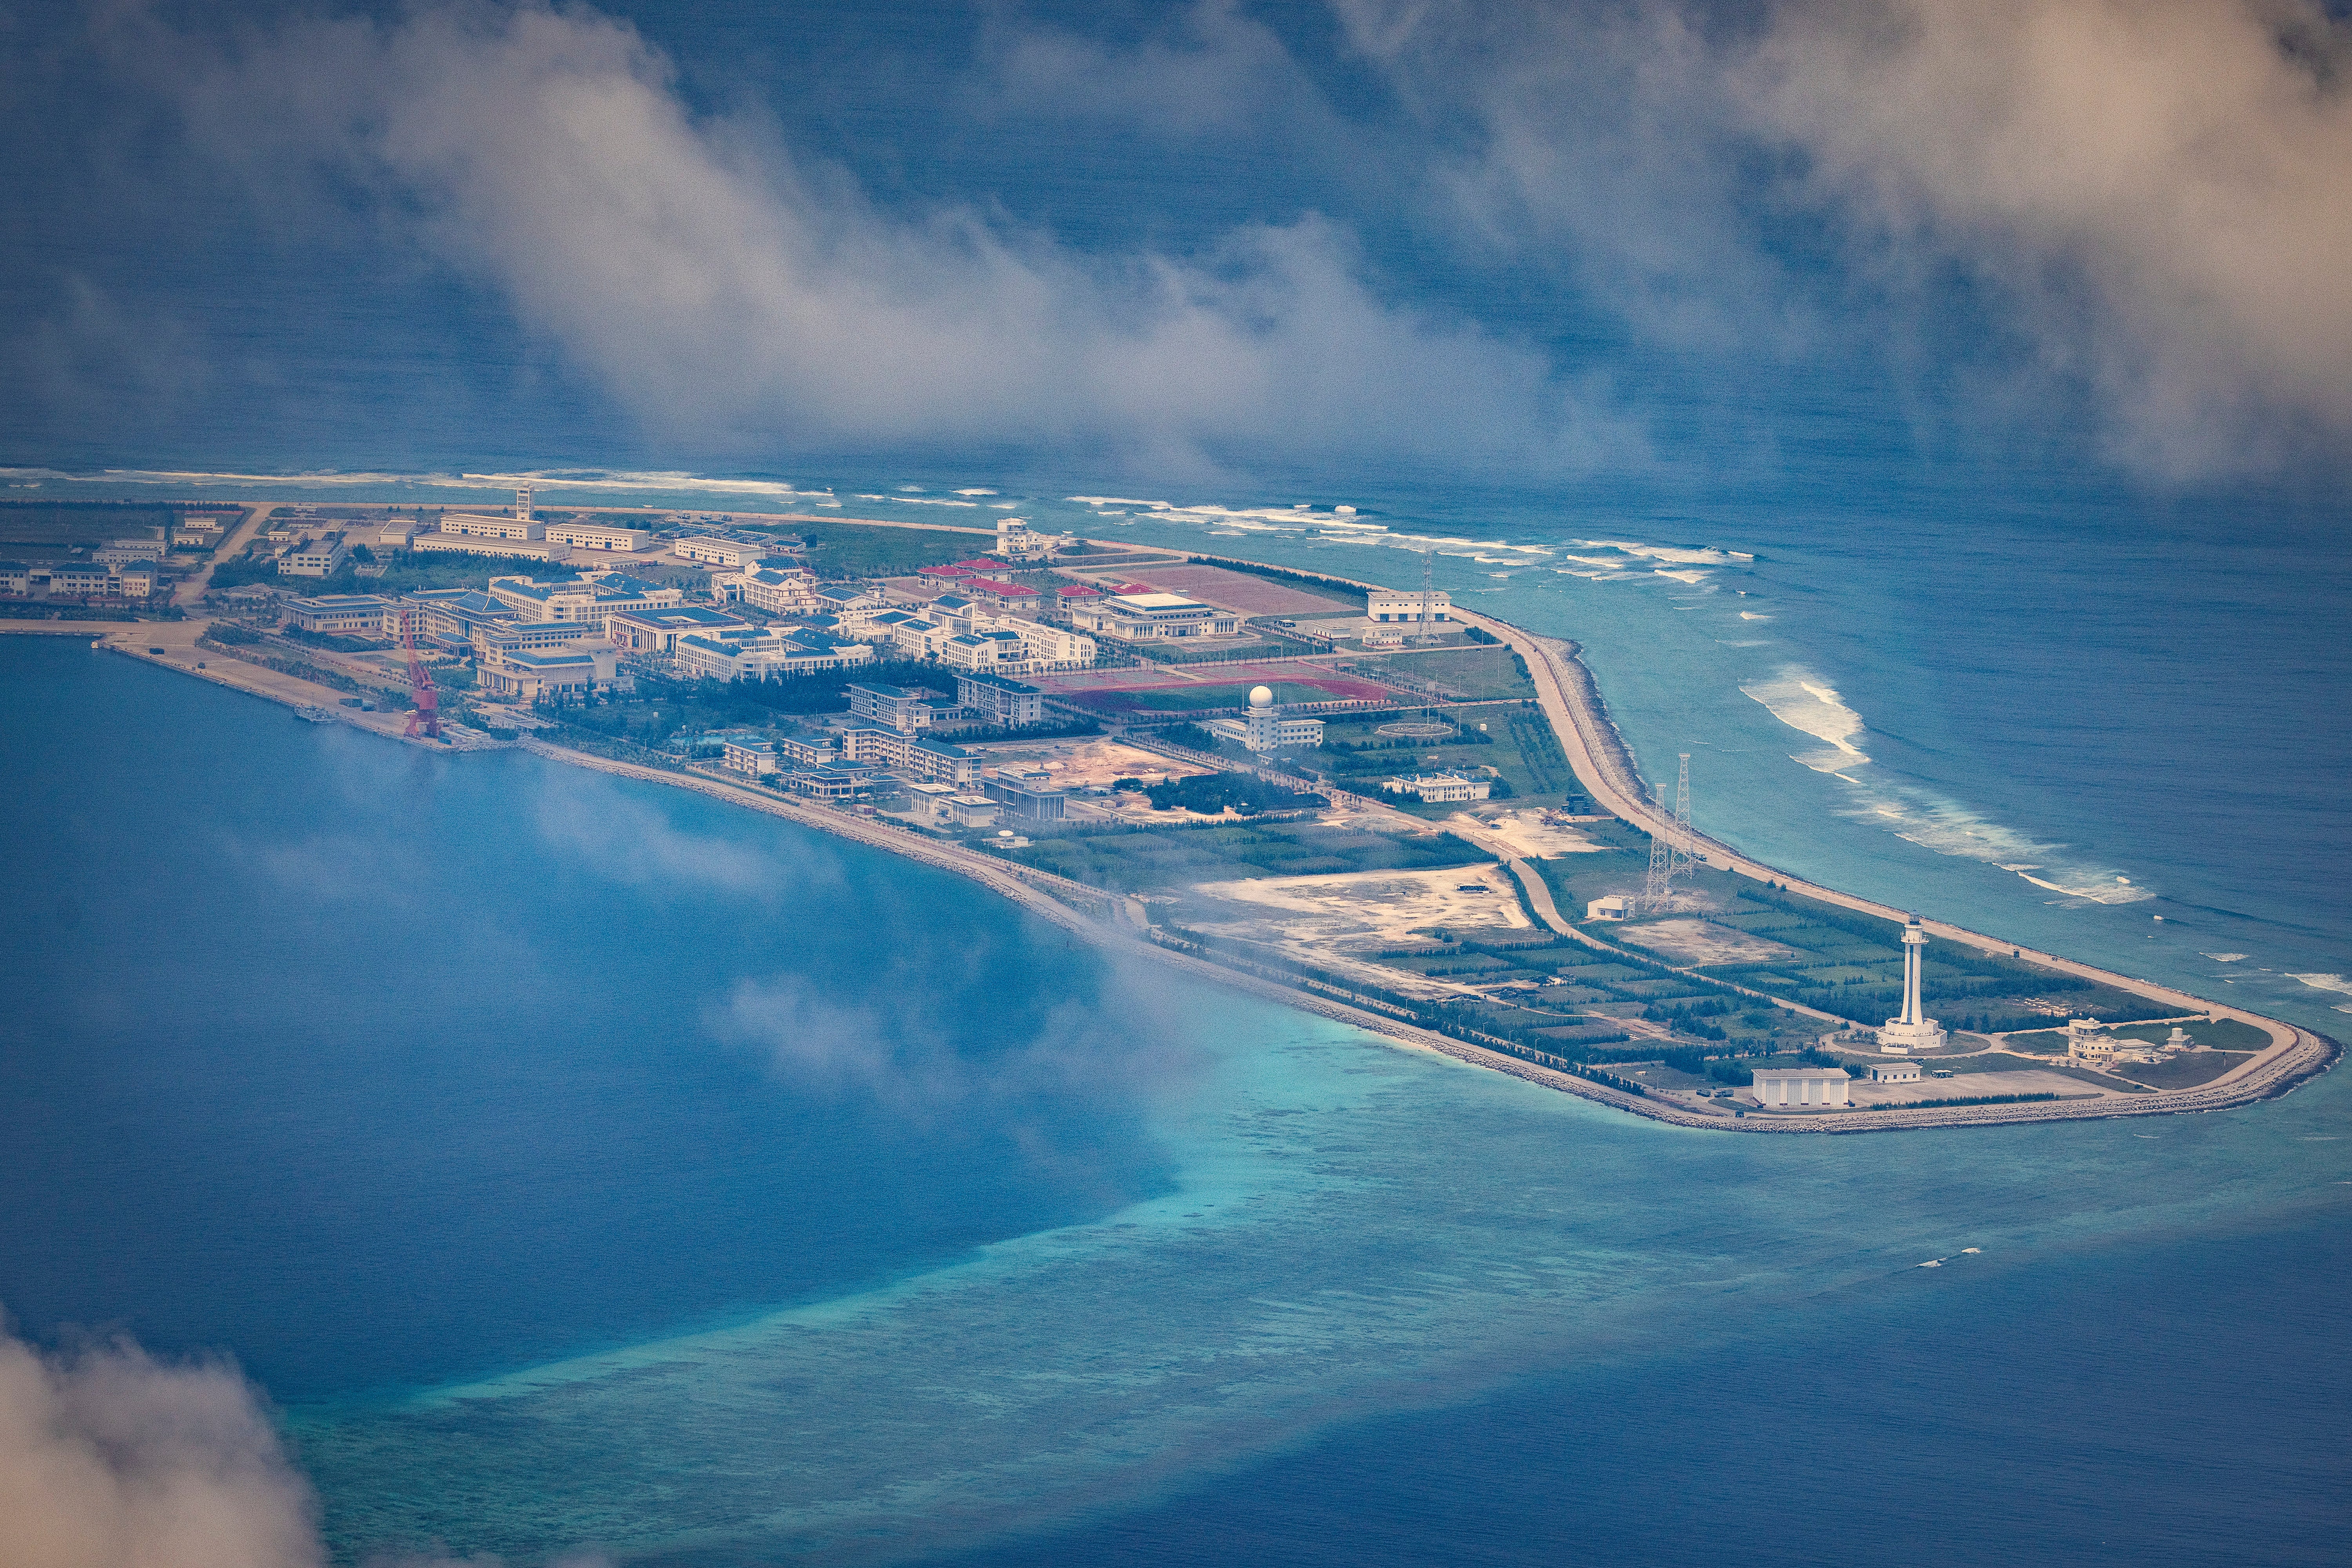 Buildings and structures are seen on the artificial island built by China in Subi Reef on 25 October 2022 in Spratly Islands, South China Sea. China has progressively asserted its claim of ownership over disputed islands in the South China Sea by artificially increasing the size of islands, creating new islands and building ports, military outposts and airstrips. The South China sea is an important trade route and is of significant interest as geopolitical tensions remain high in the region